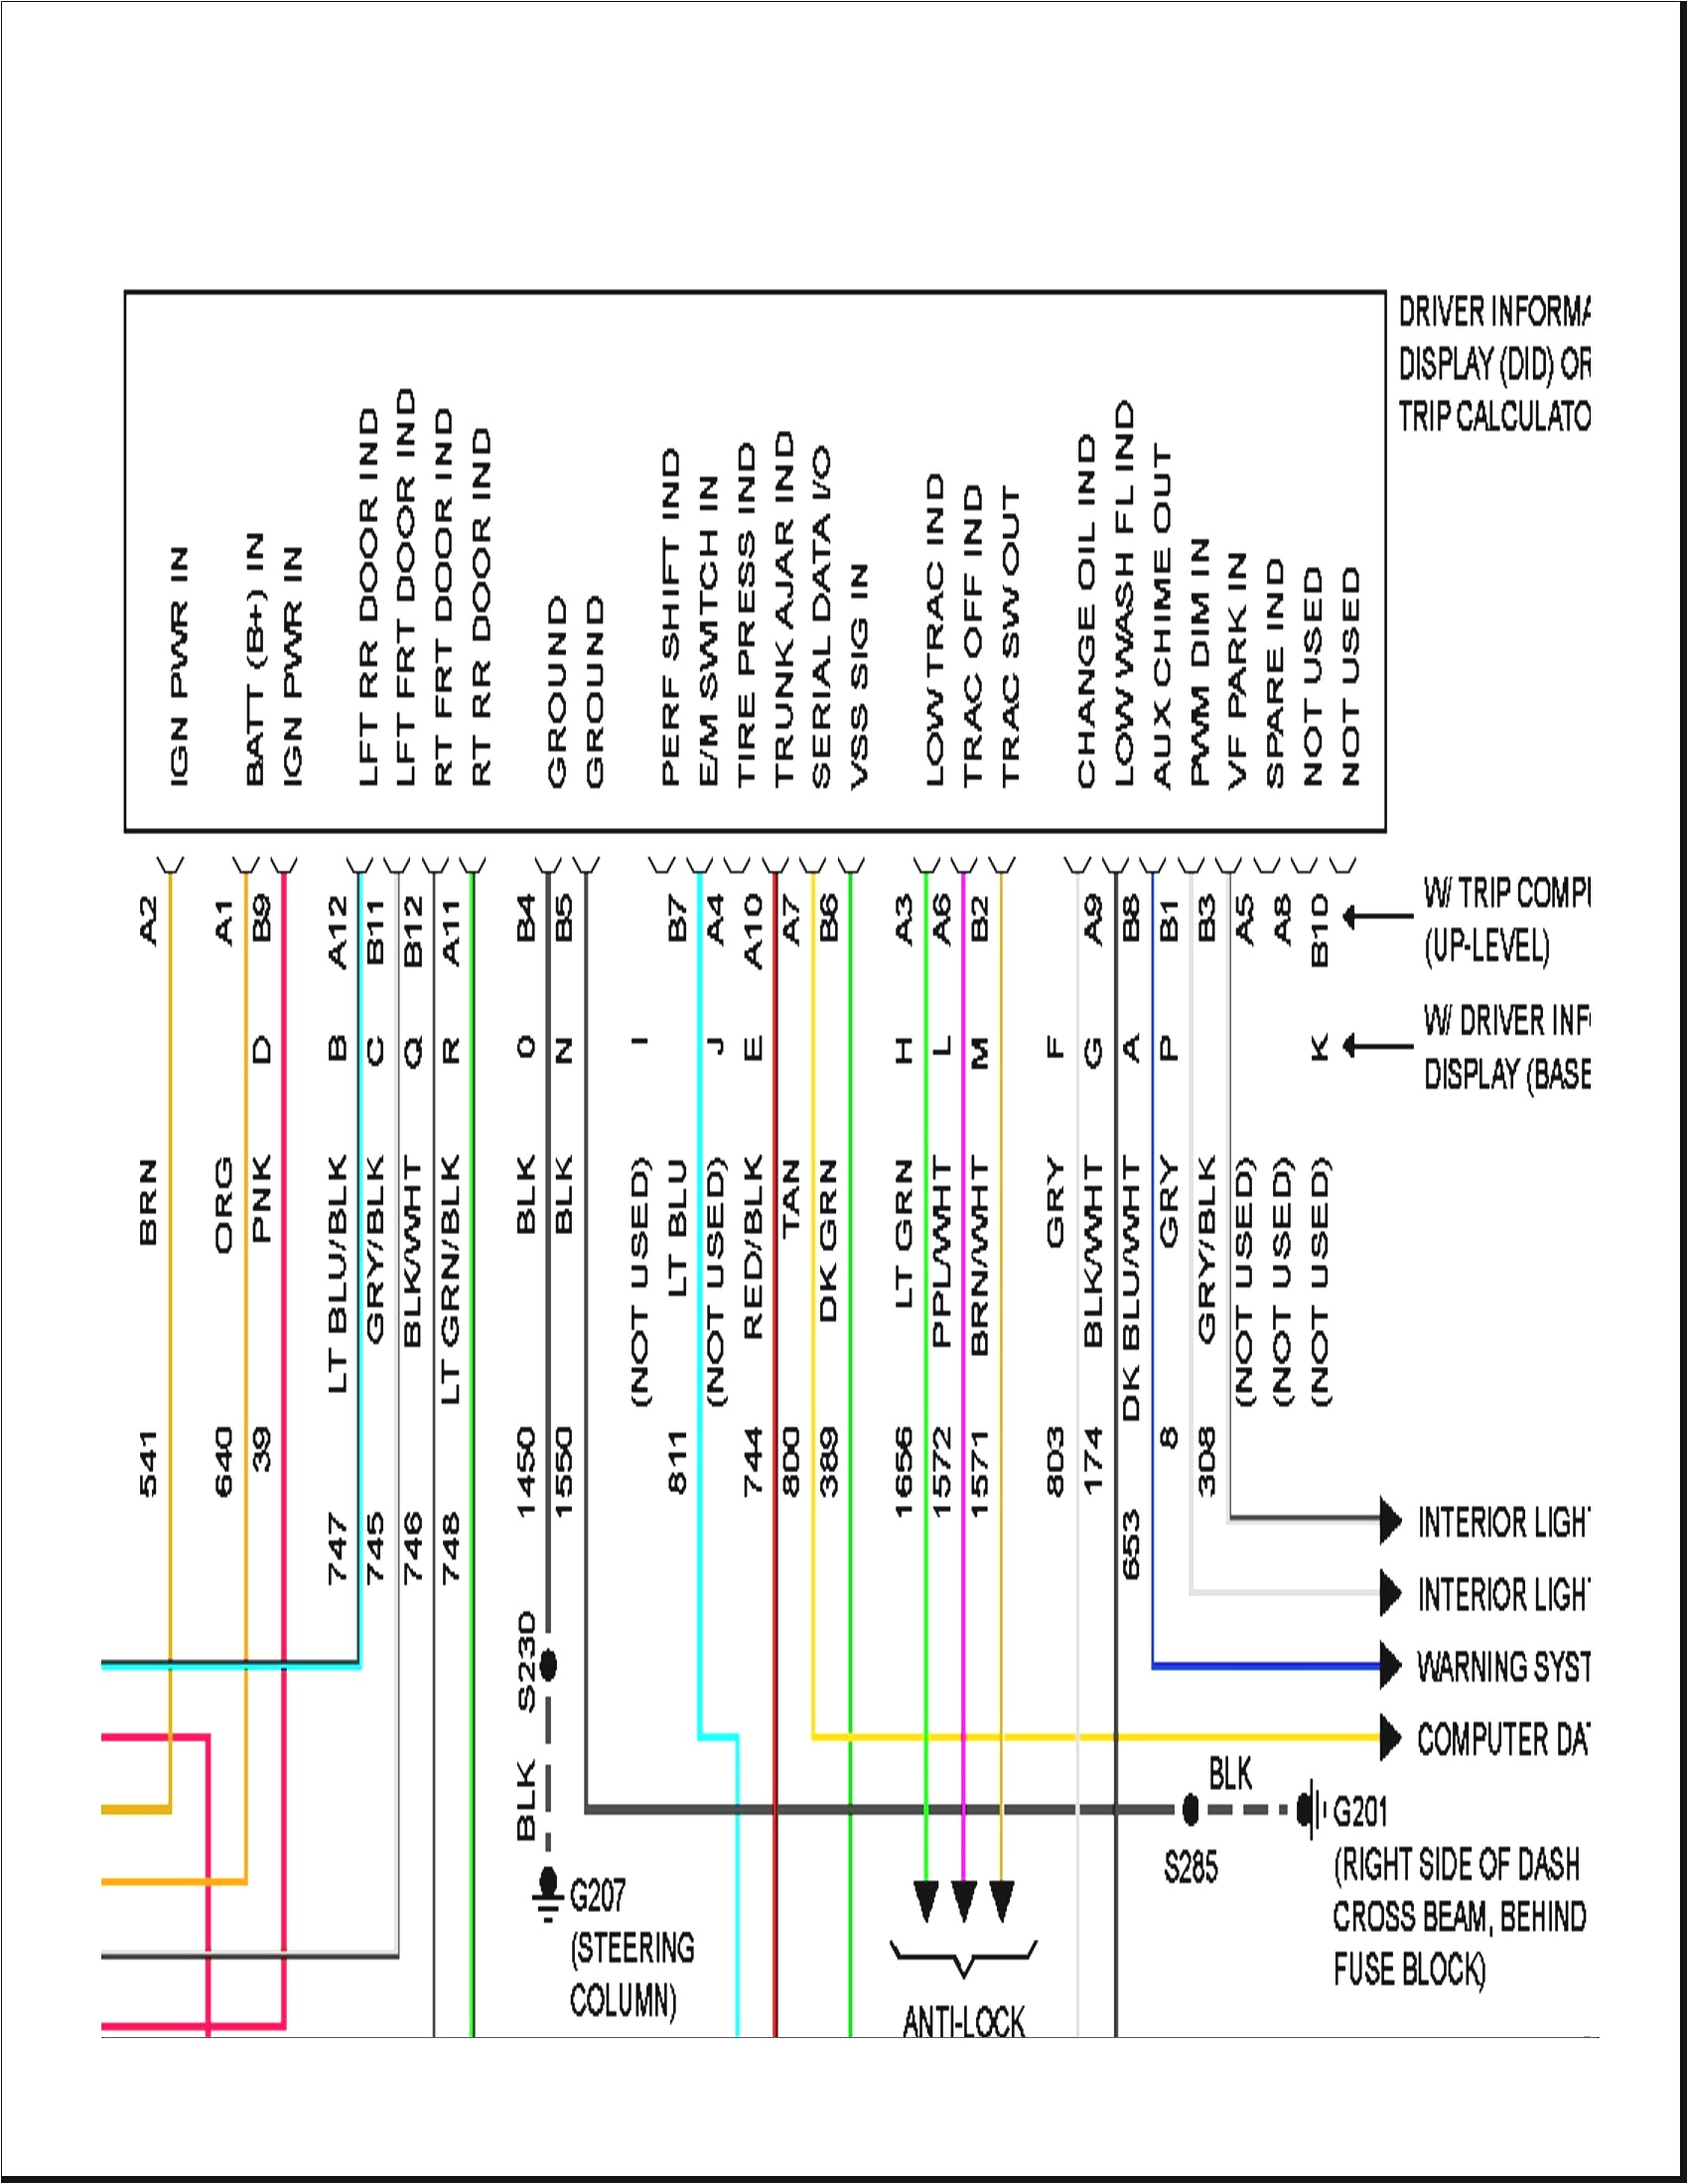 wiring diagram also with stereo wiring harness for 2007 grand prix2007 pontiac grand prix wiring diagram